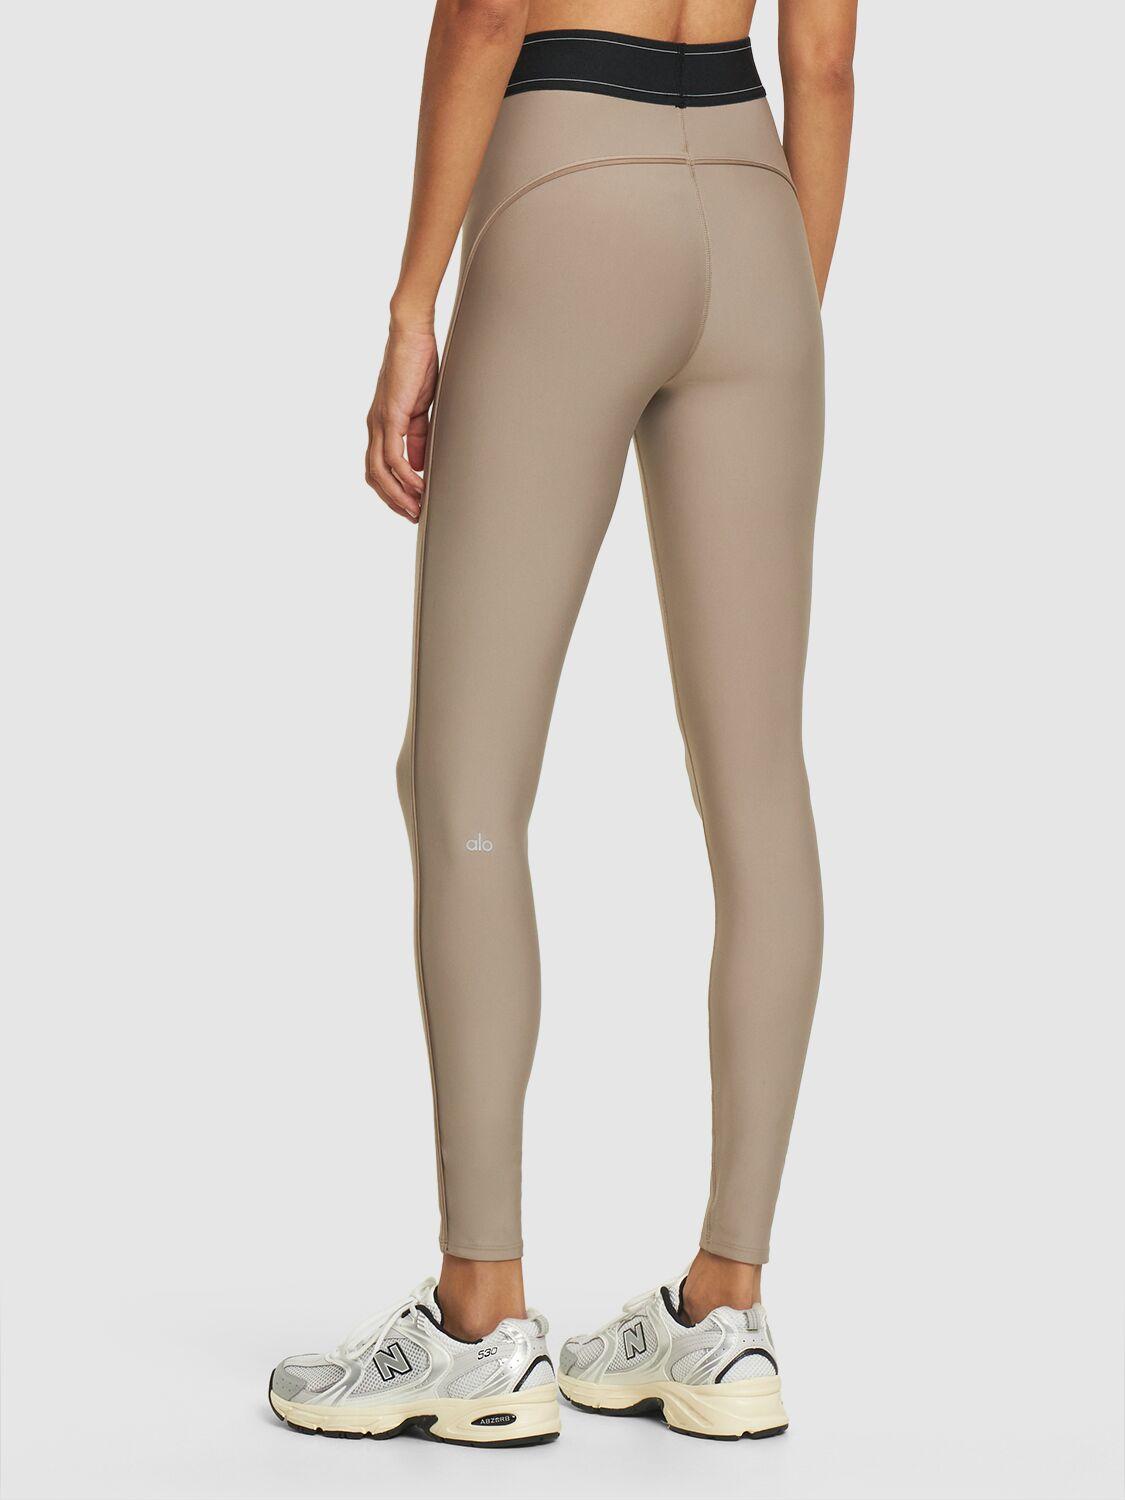 Alo Yoga Airlift Suit Up leggings in Natural